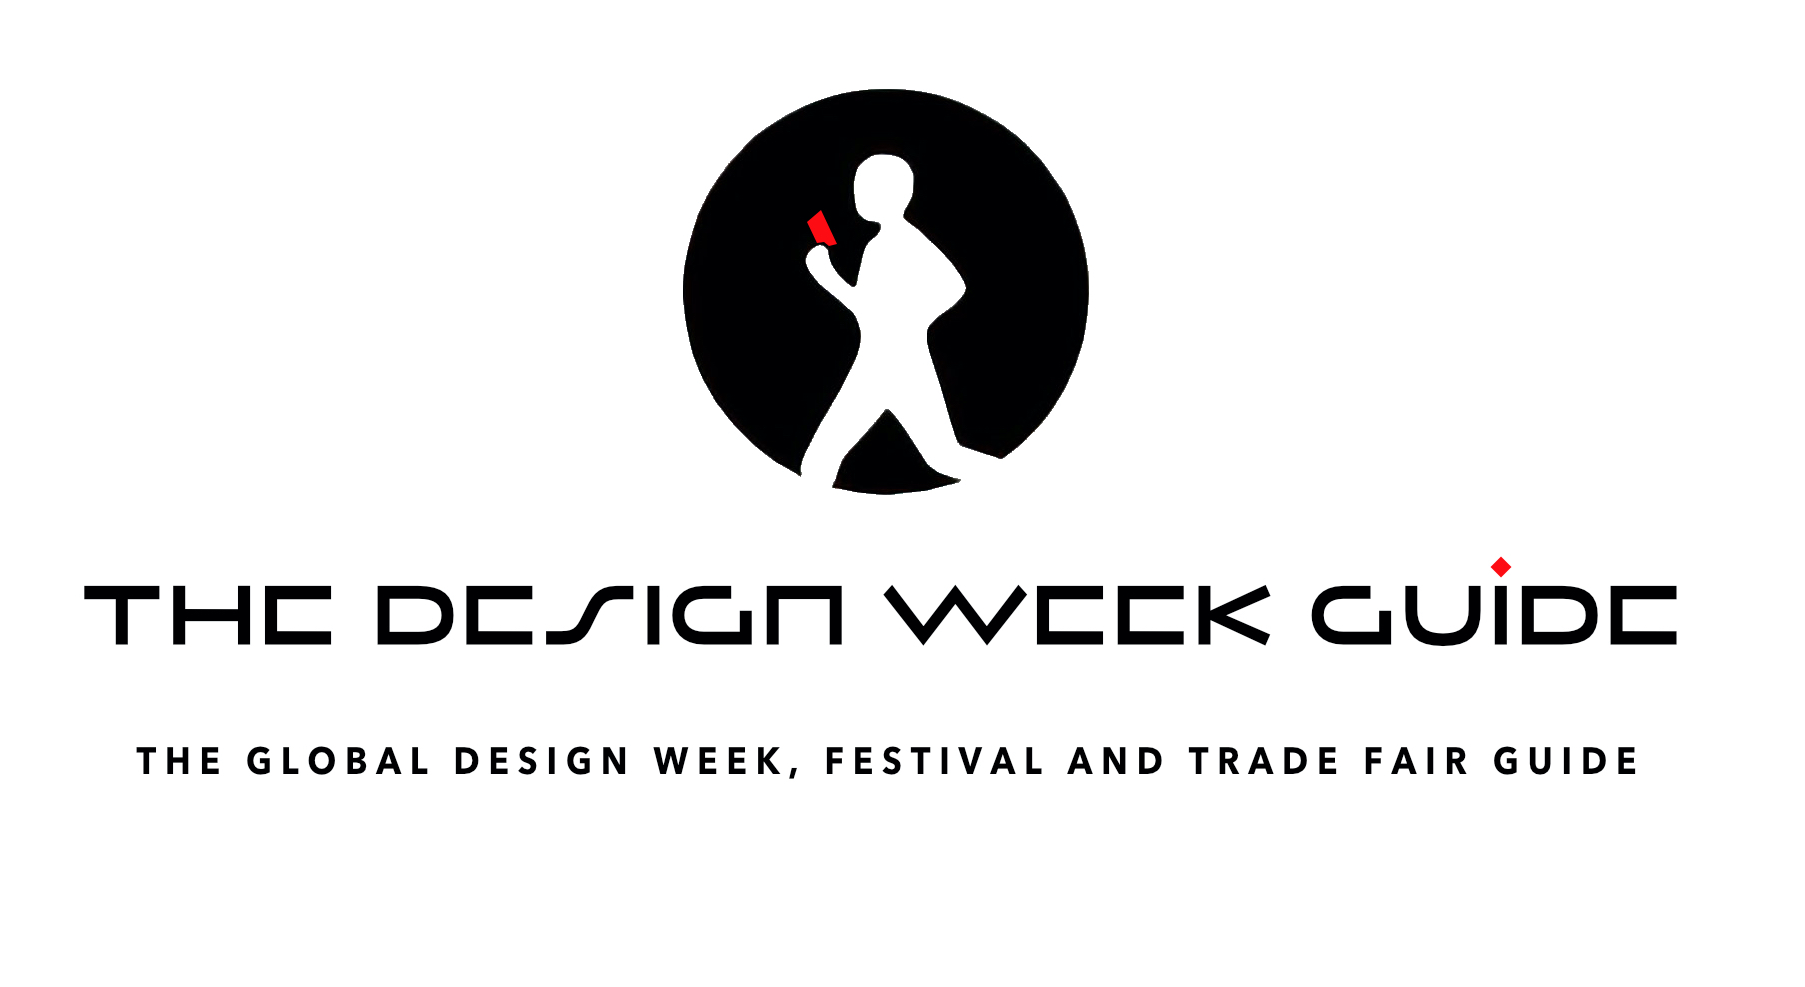 The Design Weeks, Festivals & Trade Fairs Guide